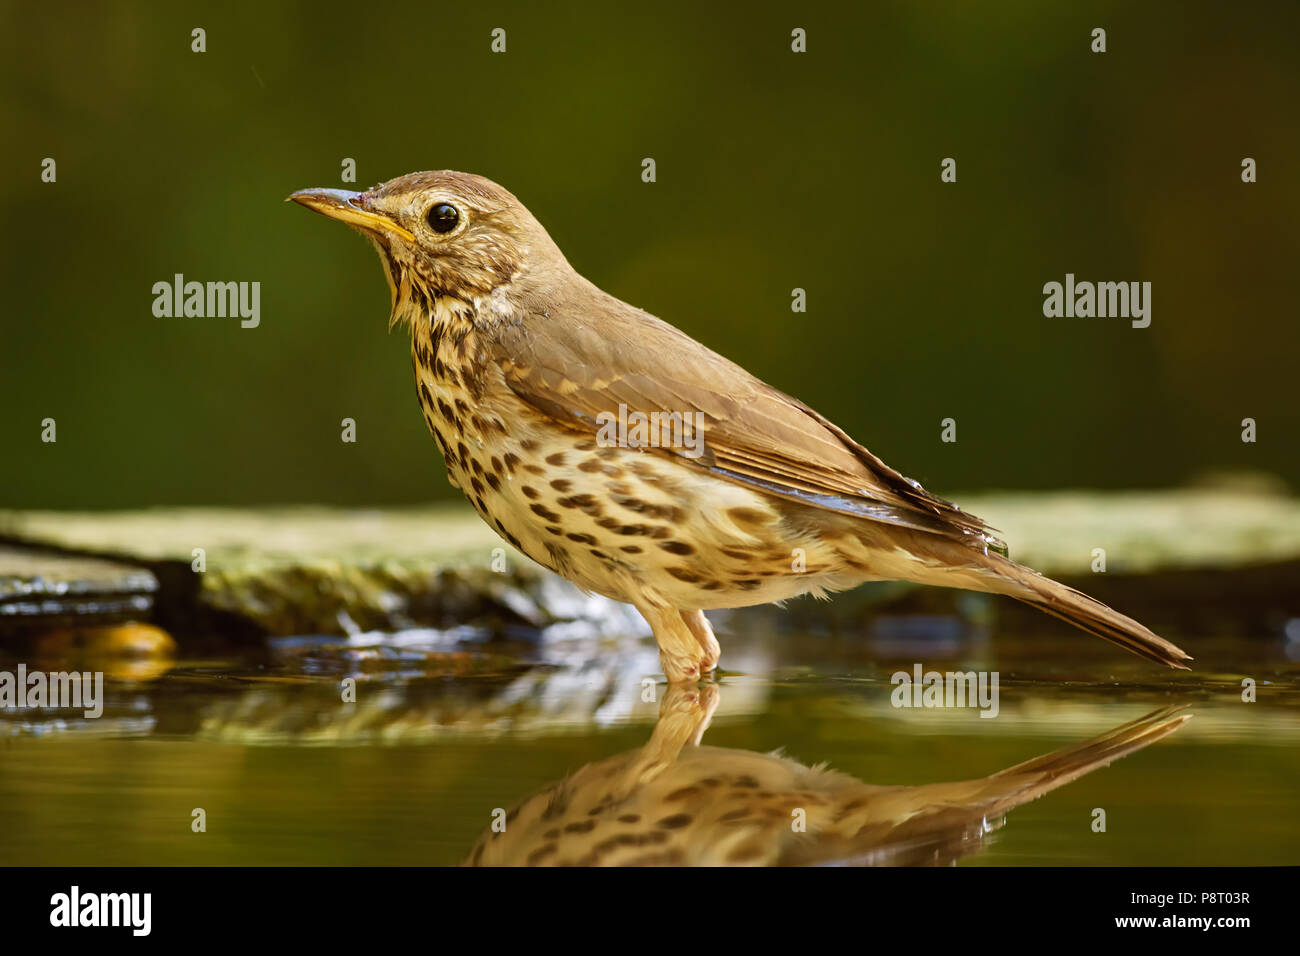 Song Thrush - Turdus philomelos, inconspicuous song bird from European forests and woodlands. Stock Photo